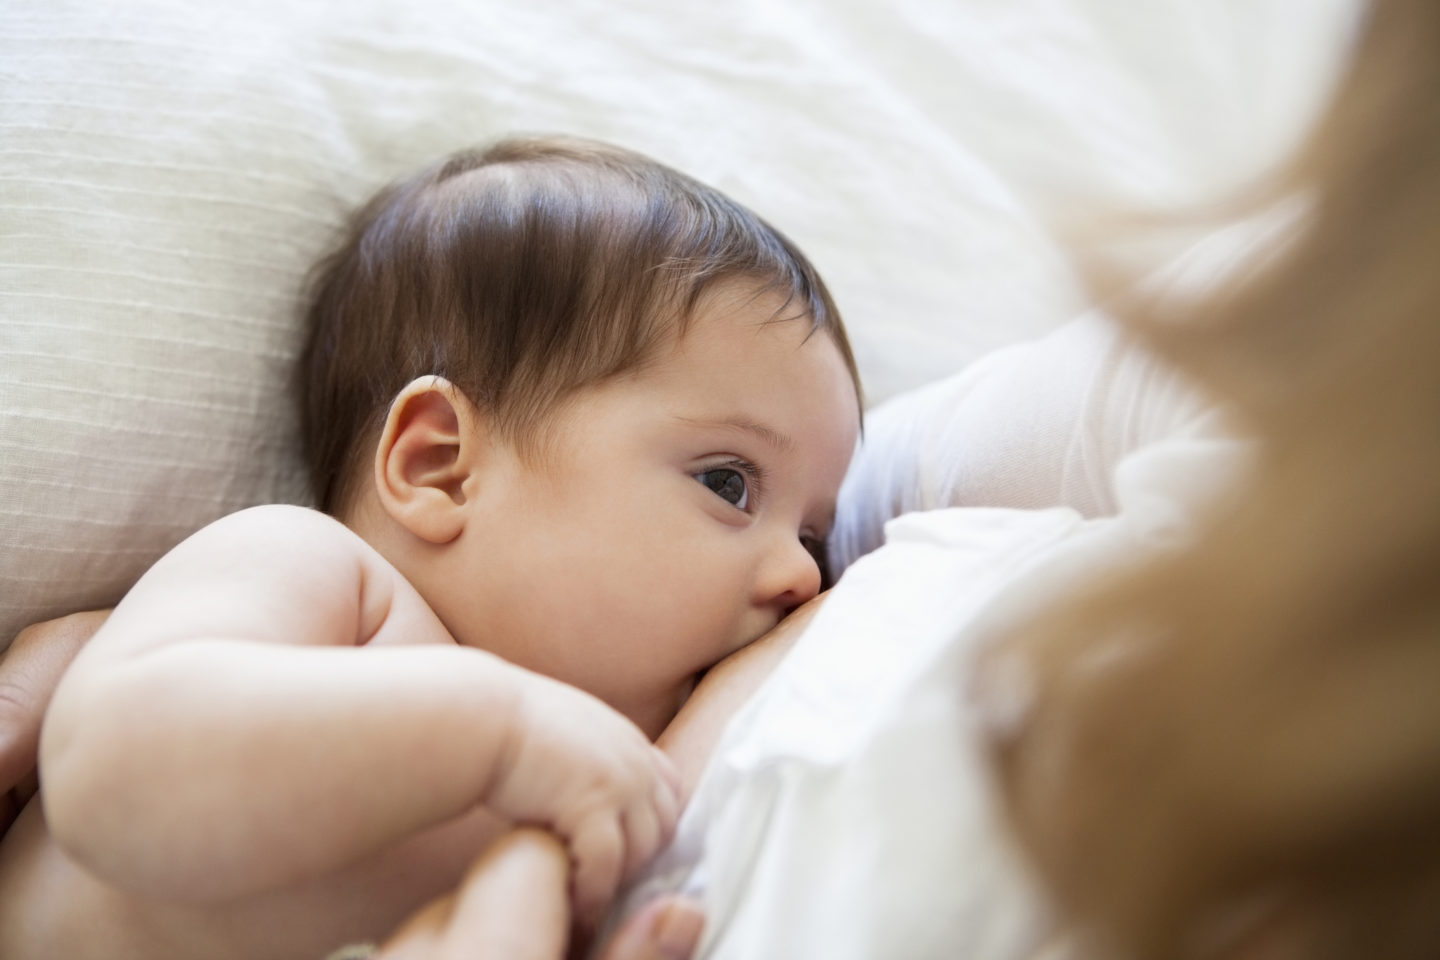 Your Cell Phone Could Be Playing A Role In Your Child’s Breastfeeding Experience